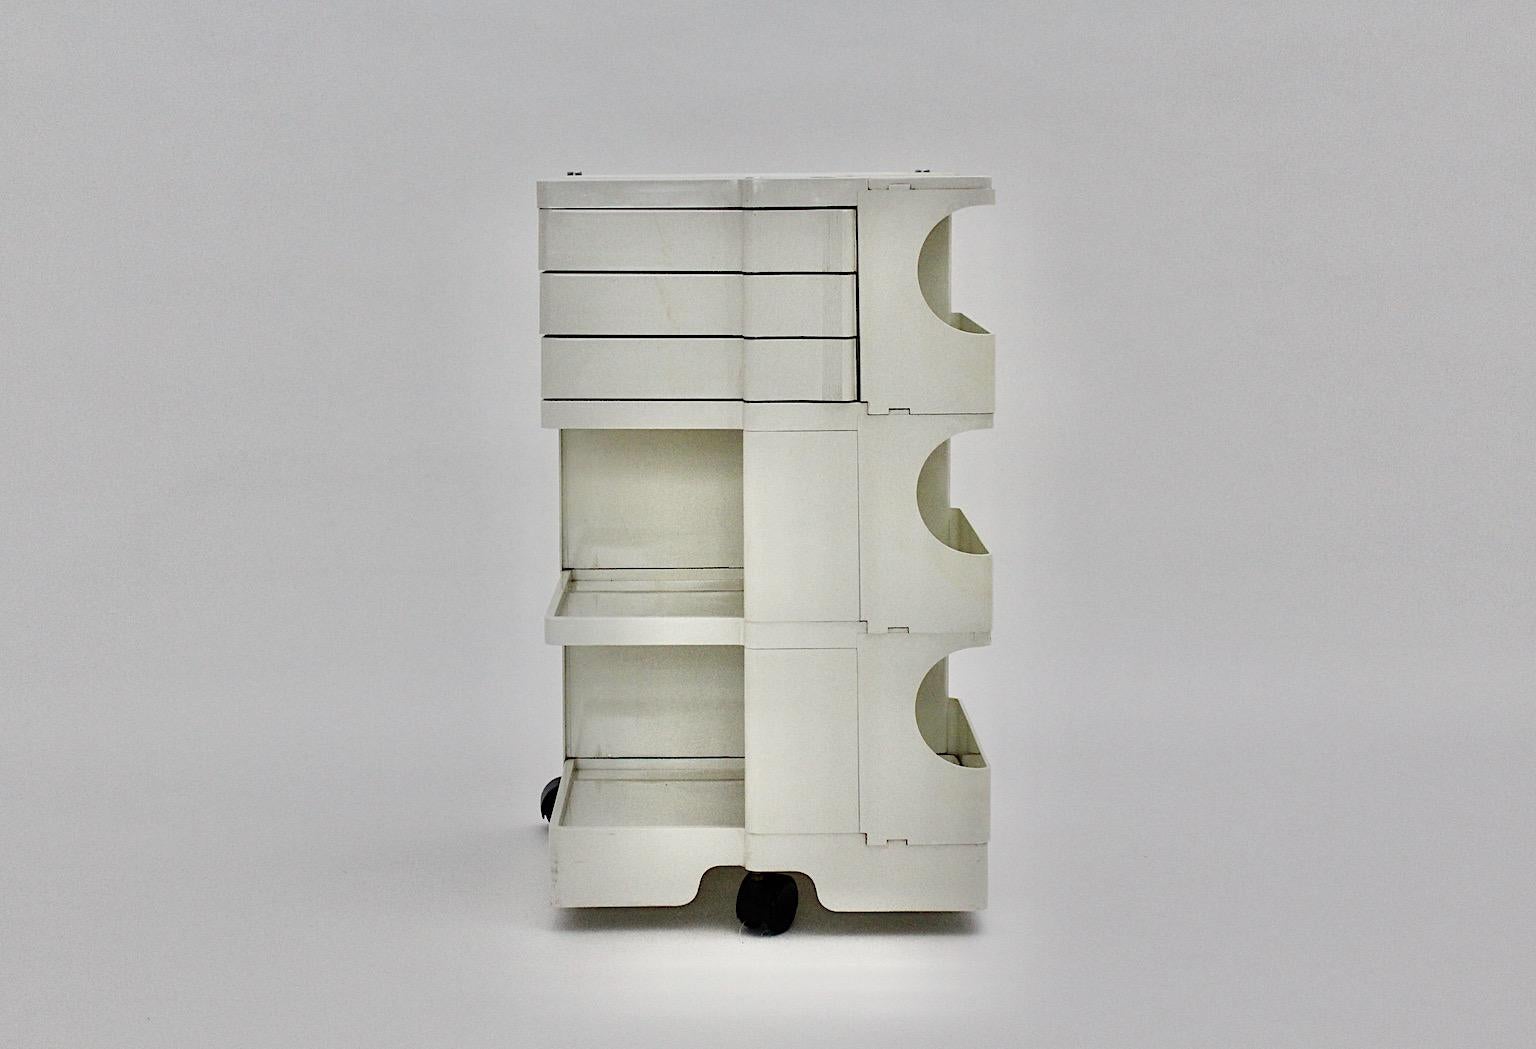 Space Age vintage storage trolley container boy from plastic in white color by
Joe Colombo for Bieffeplast 1970s Italy.
Iconic white vintage plastic storage container with wheels model boy with many revolved shelves for an easy storage.
Labeled